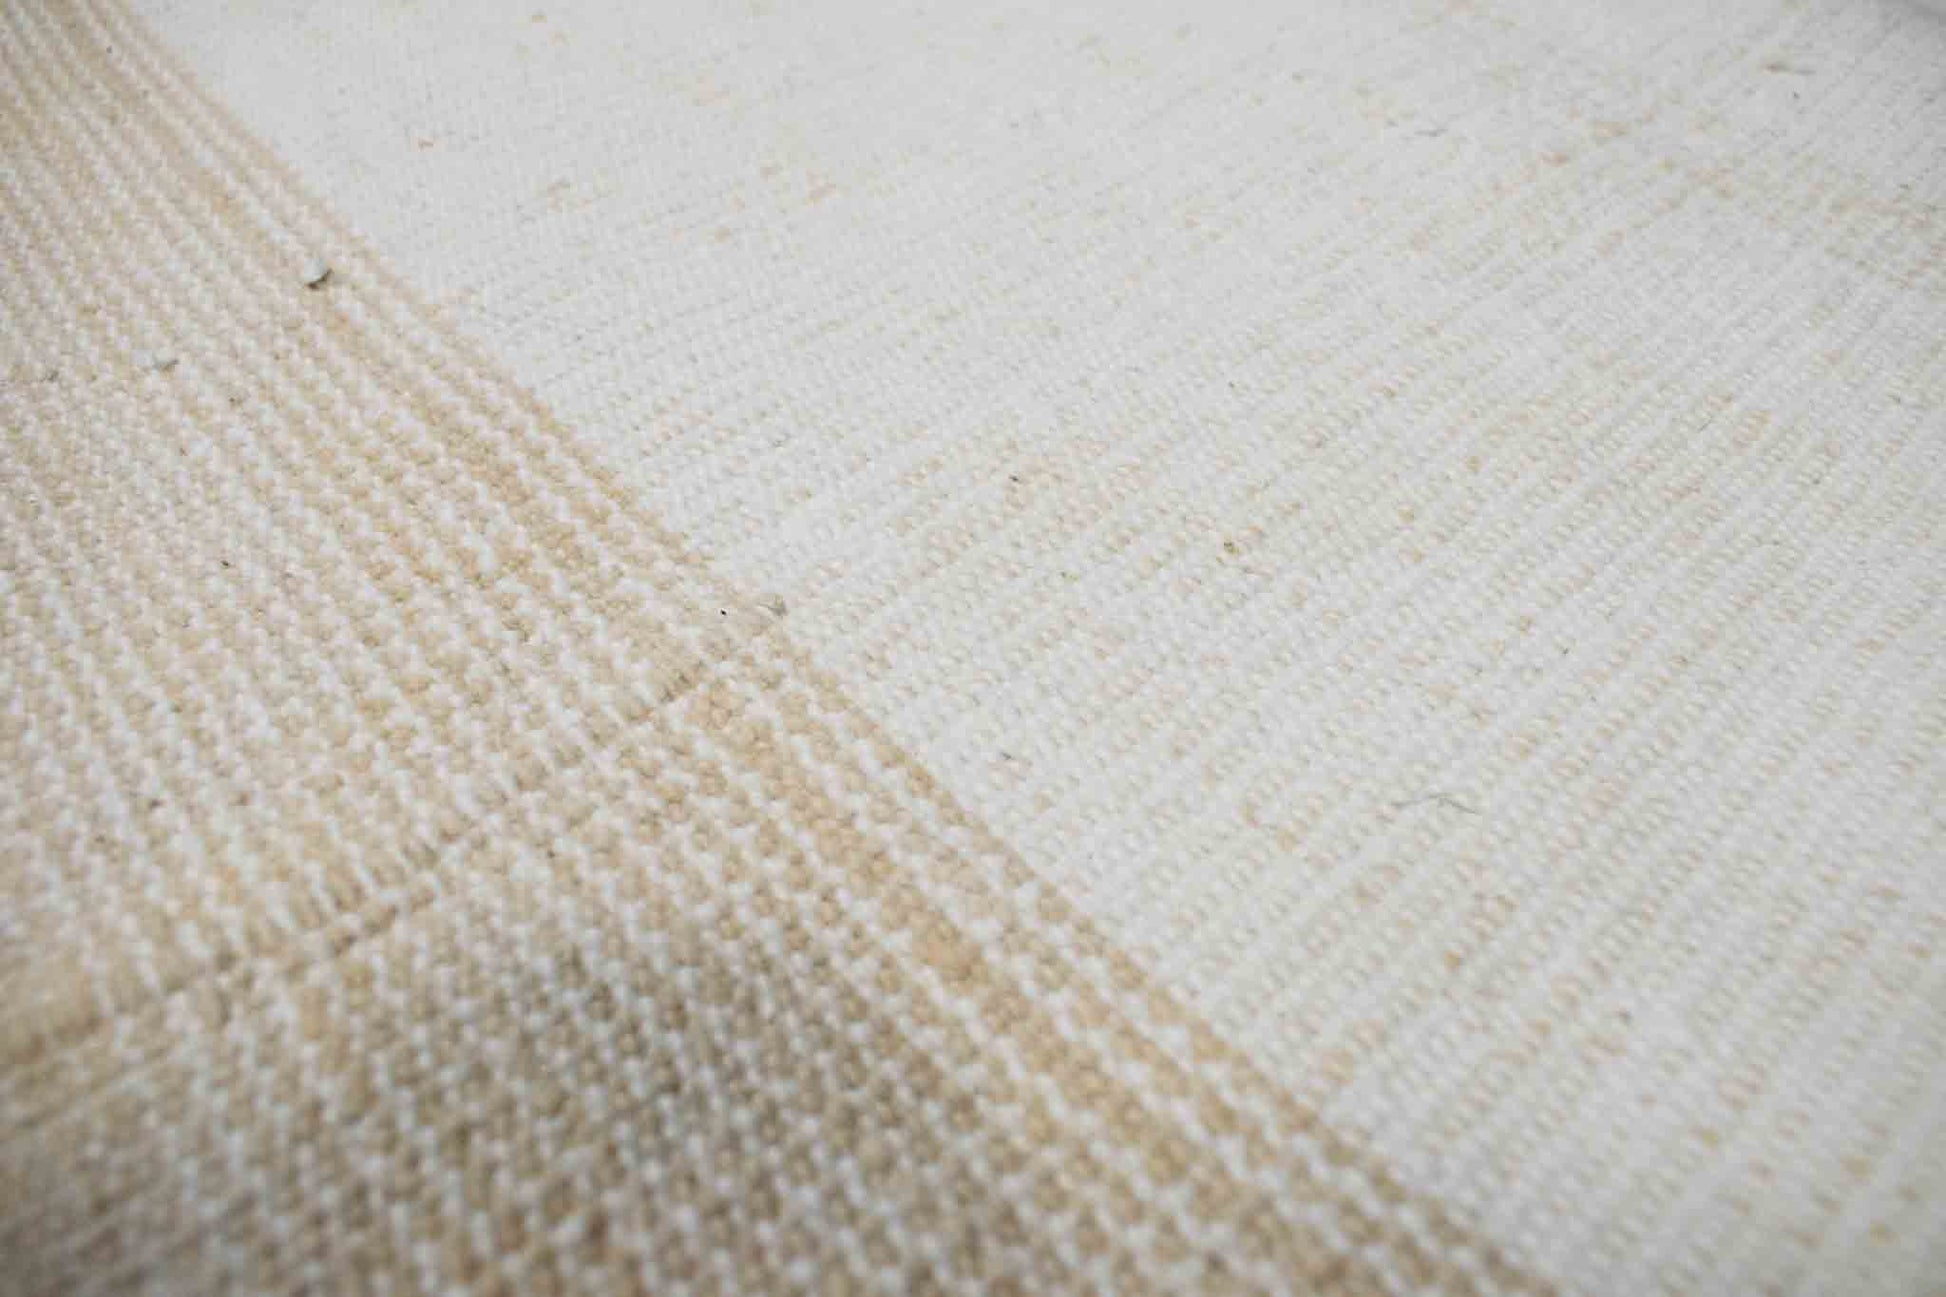 Handwoven Turkish kilim sisal pillow cover fabric in ivory white with wheat stripes.